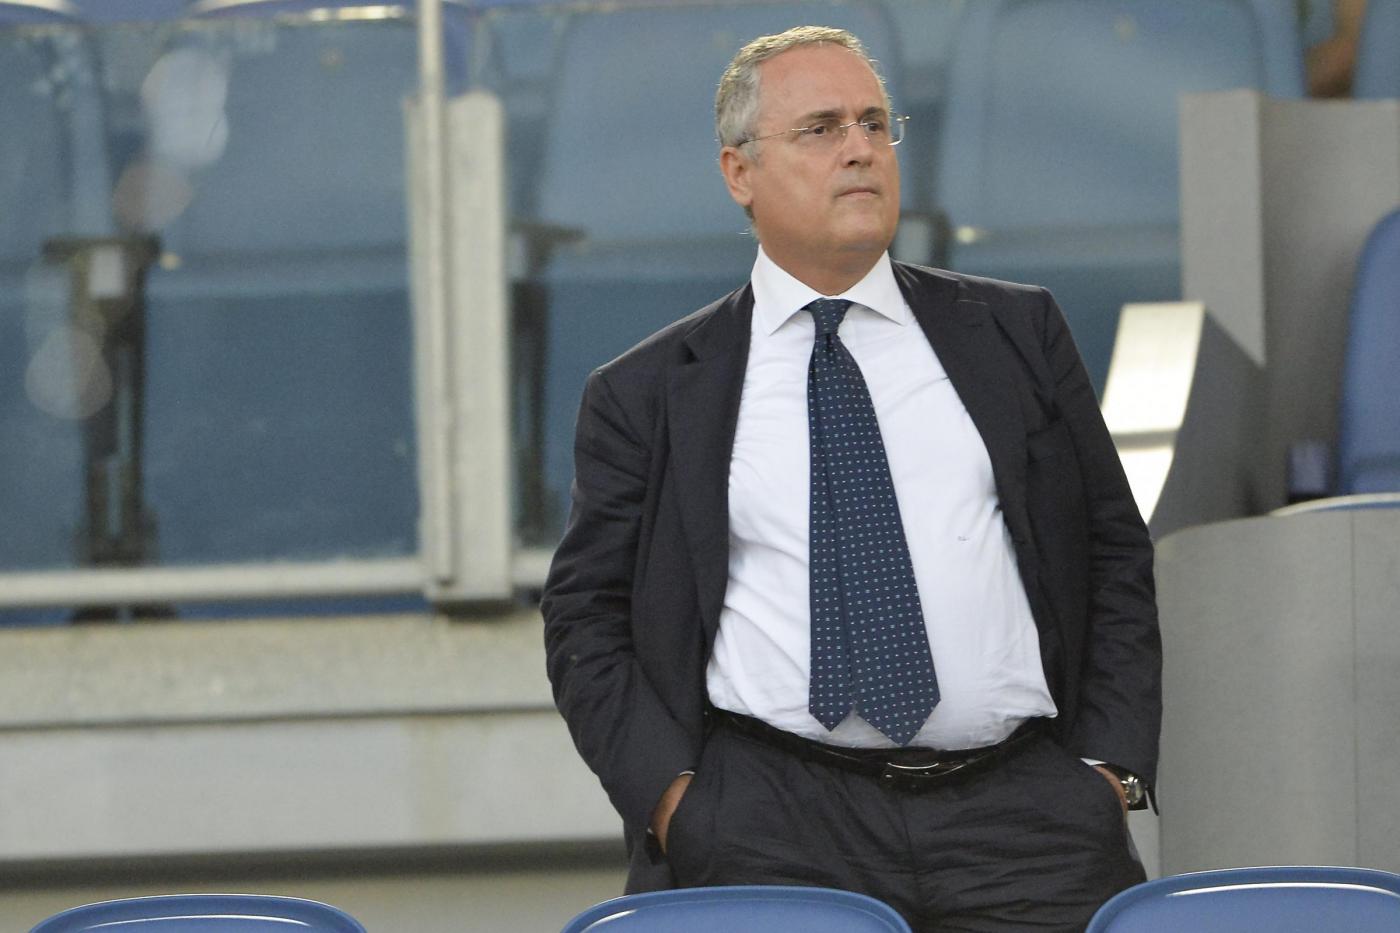 Lazio President Claudio Lotito Has Insisted The Squad Return To Training As Soon As Possible, A Decision Not Shared By Inter & Juve